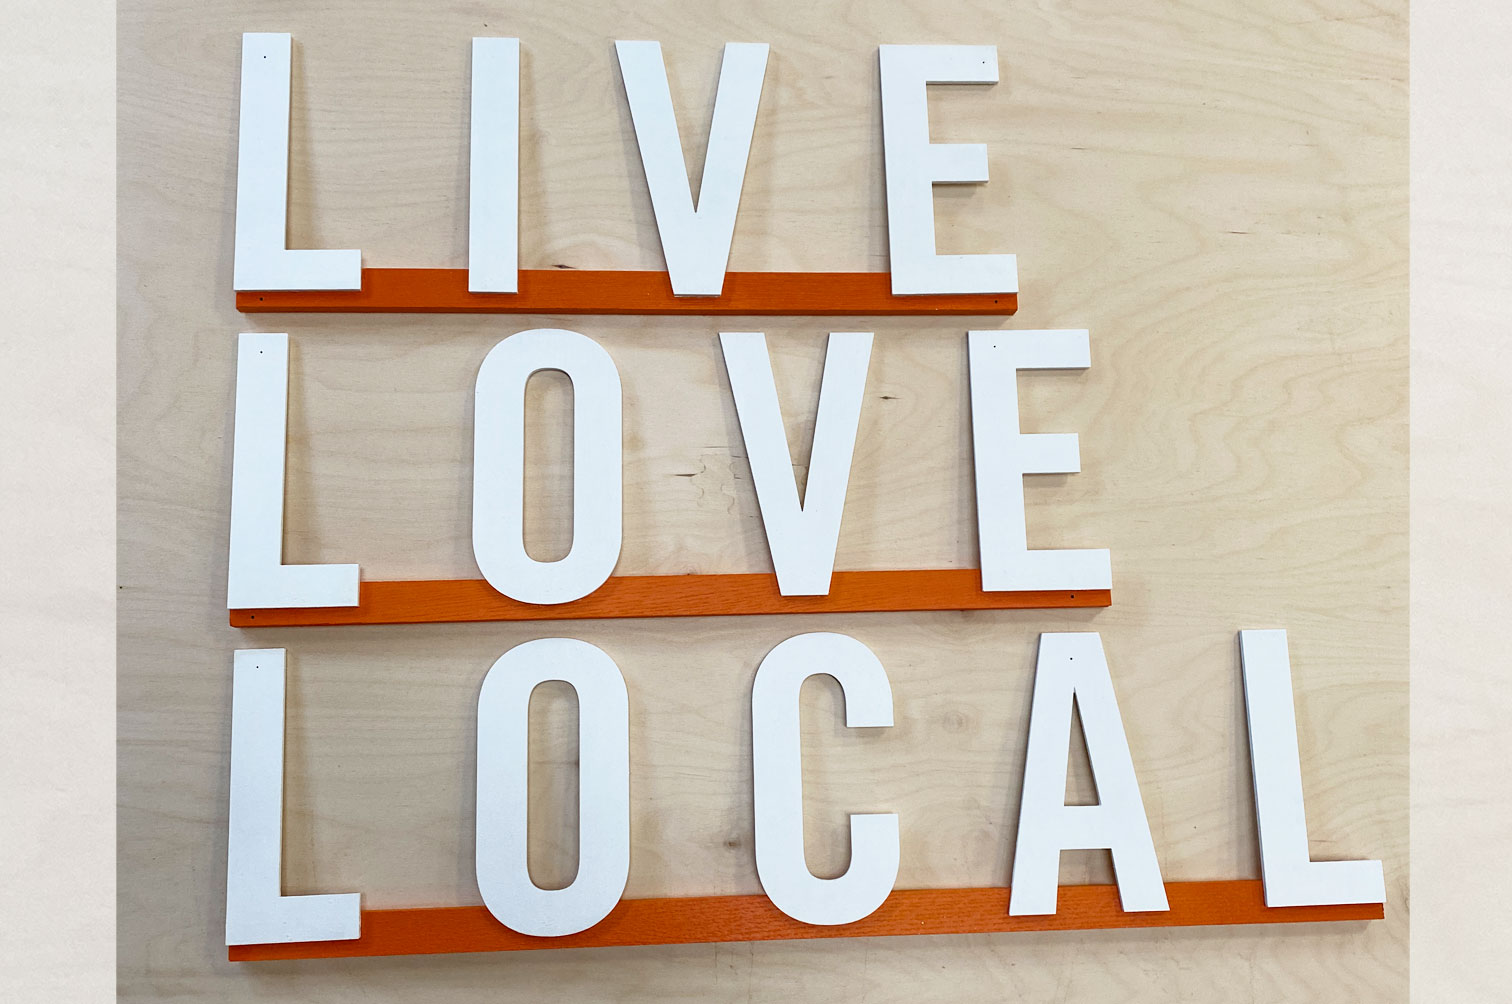 Live Love Local sign for Daylesford Organic farm. large wood letters.